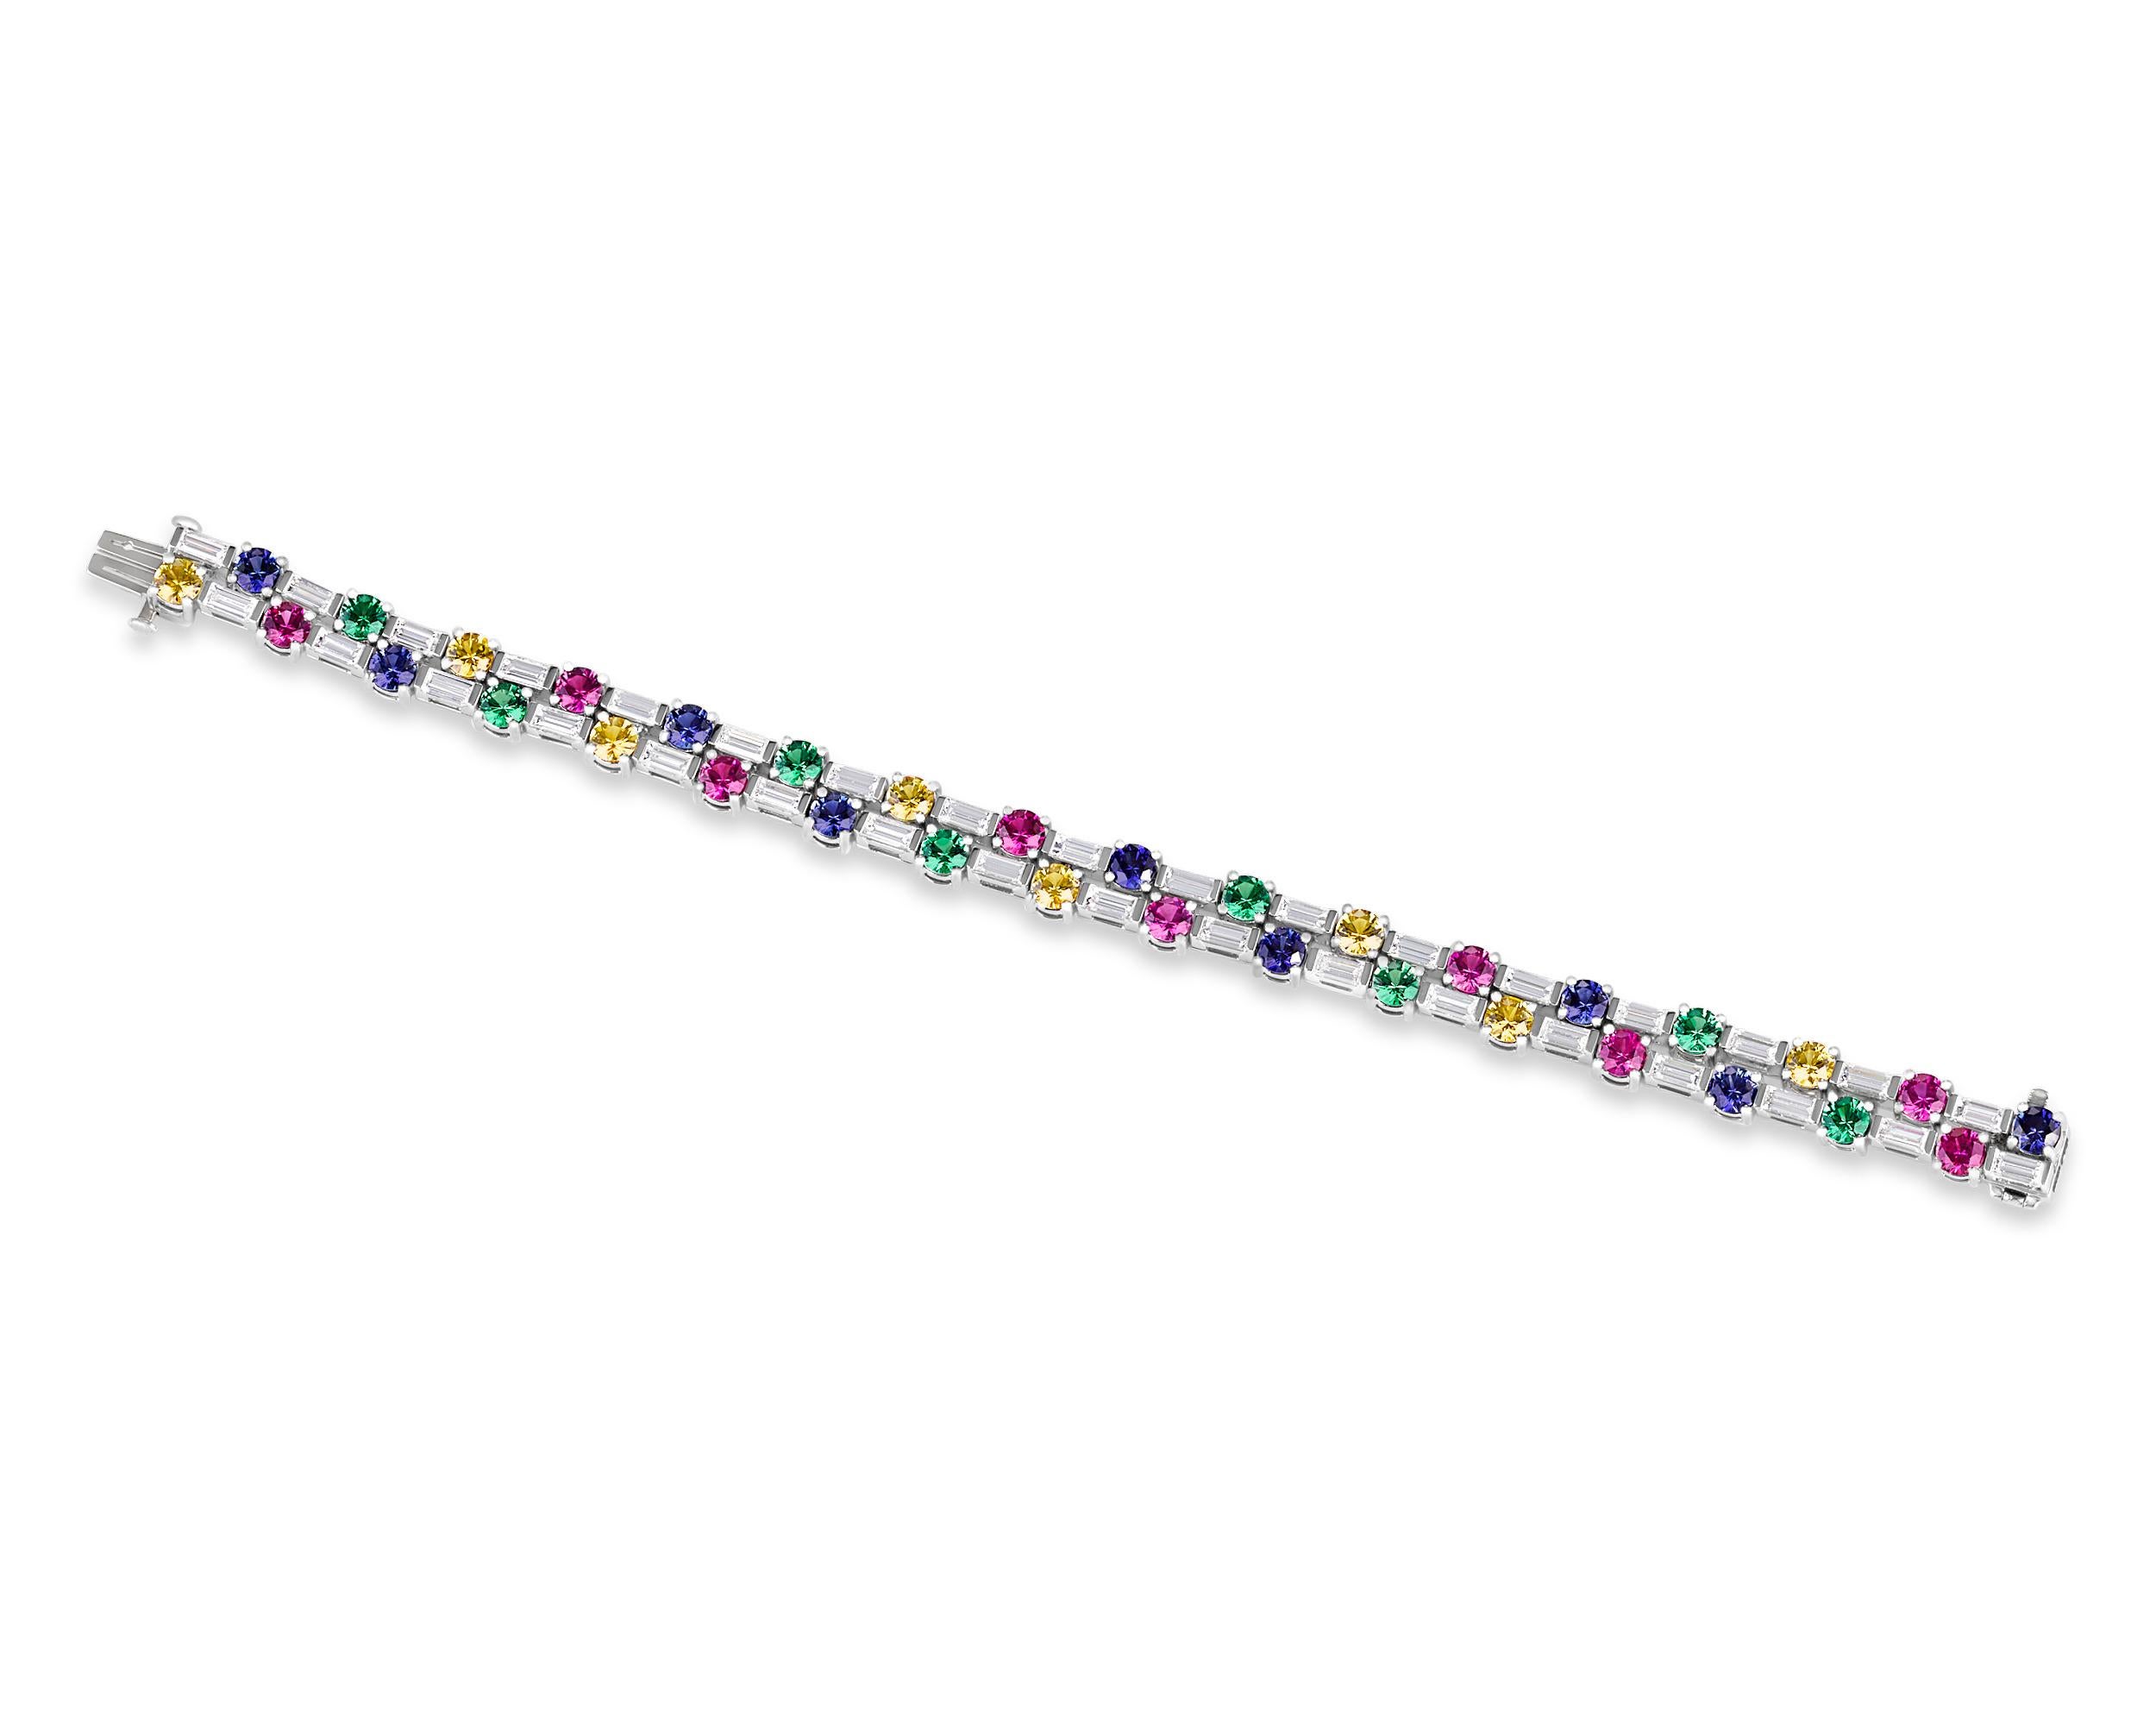 A wonderful collection of colorful round gemstones dot the length of this bracelet from Oscar Heyman. Eighteen pink and blue sapphires totaling 5.38 carats, eight tsavorites totaling 2.19 carats and 8 fancy yellow diamonds totaling 2.35 carats